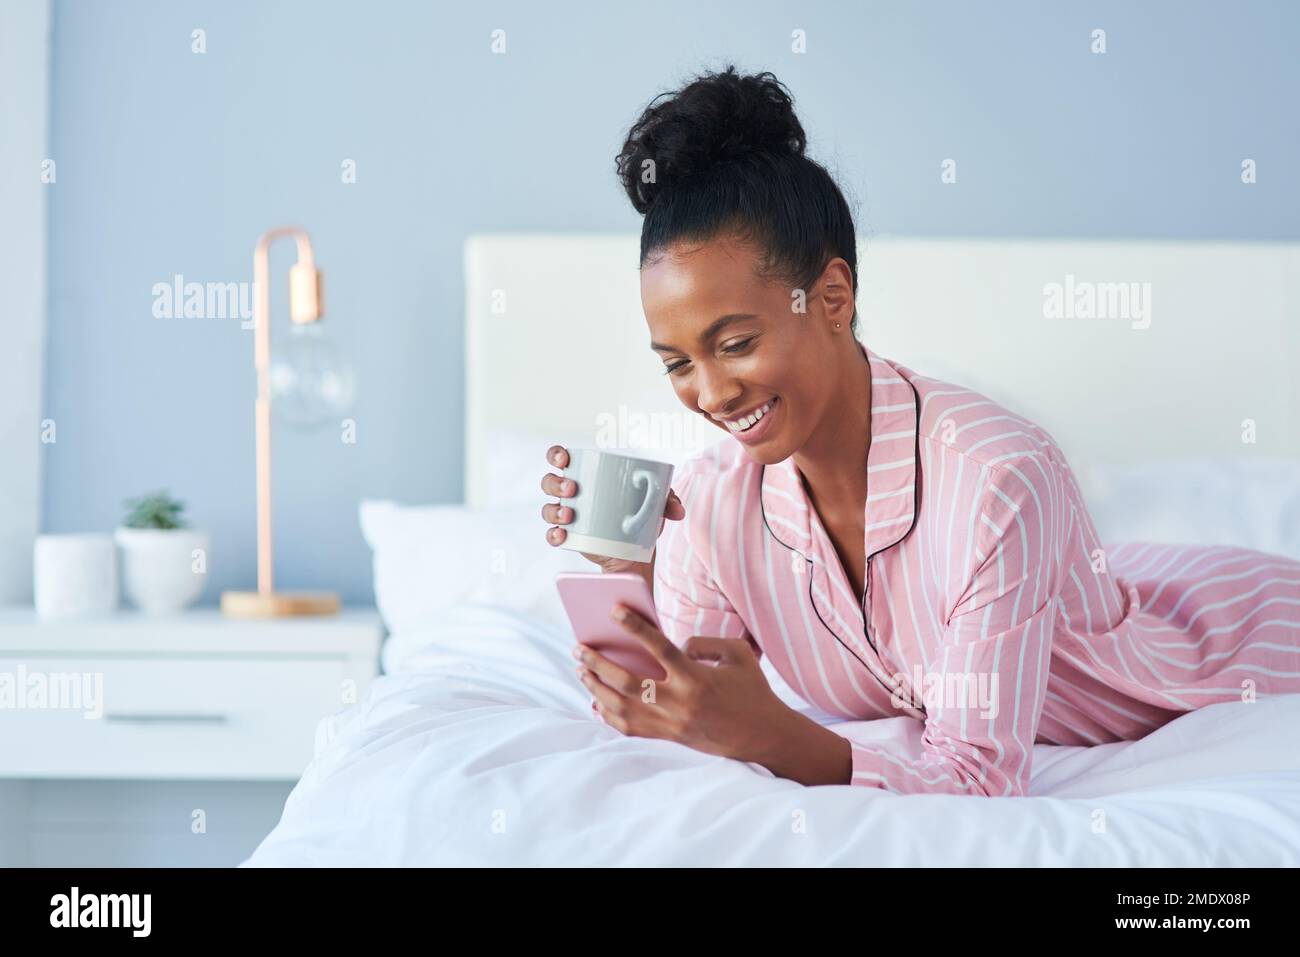 Time to catch up on some hot gossip. an attractive young woman drinking coffee while using her cellphone in bed at home. Stock Photo